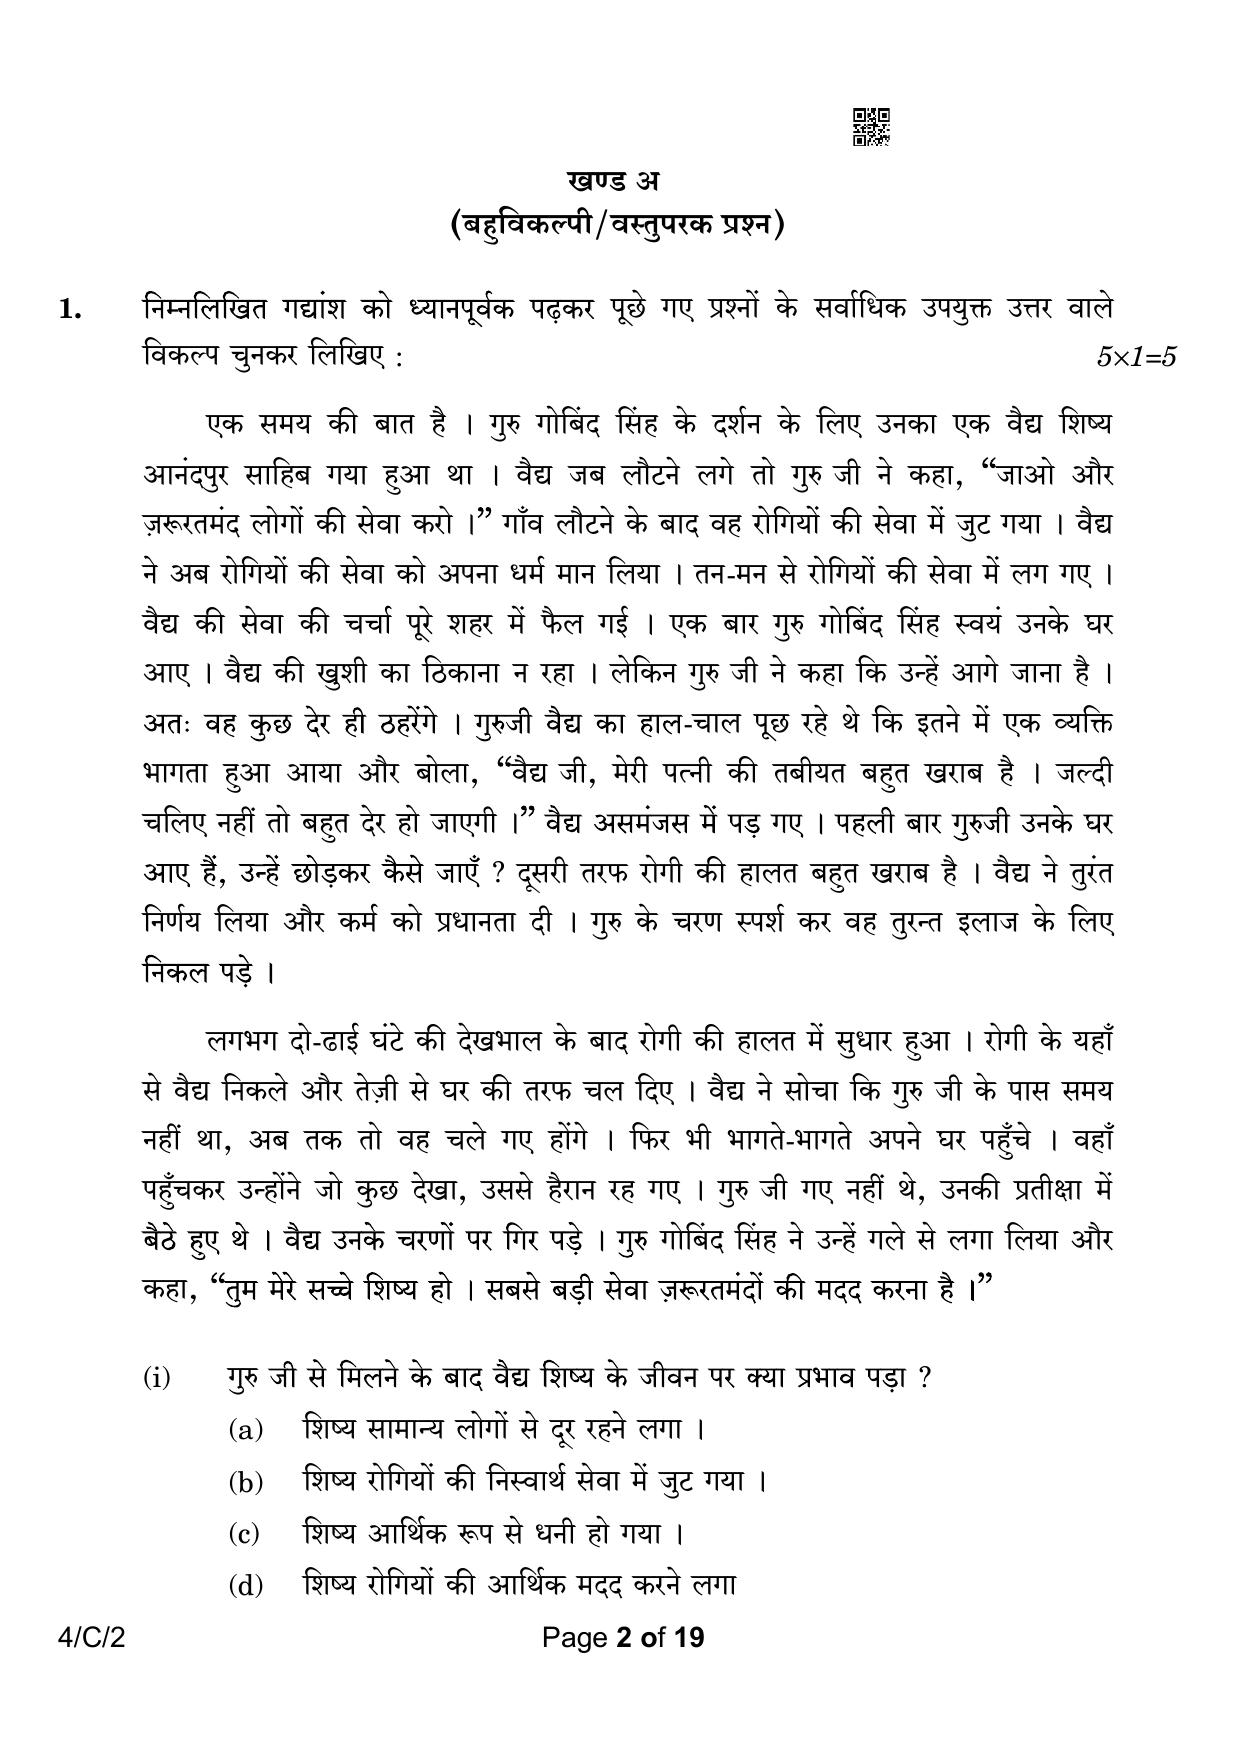 CBSE Class 10 4-2 Hindi B 2023 (Compartment) Question Paper - Page 2